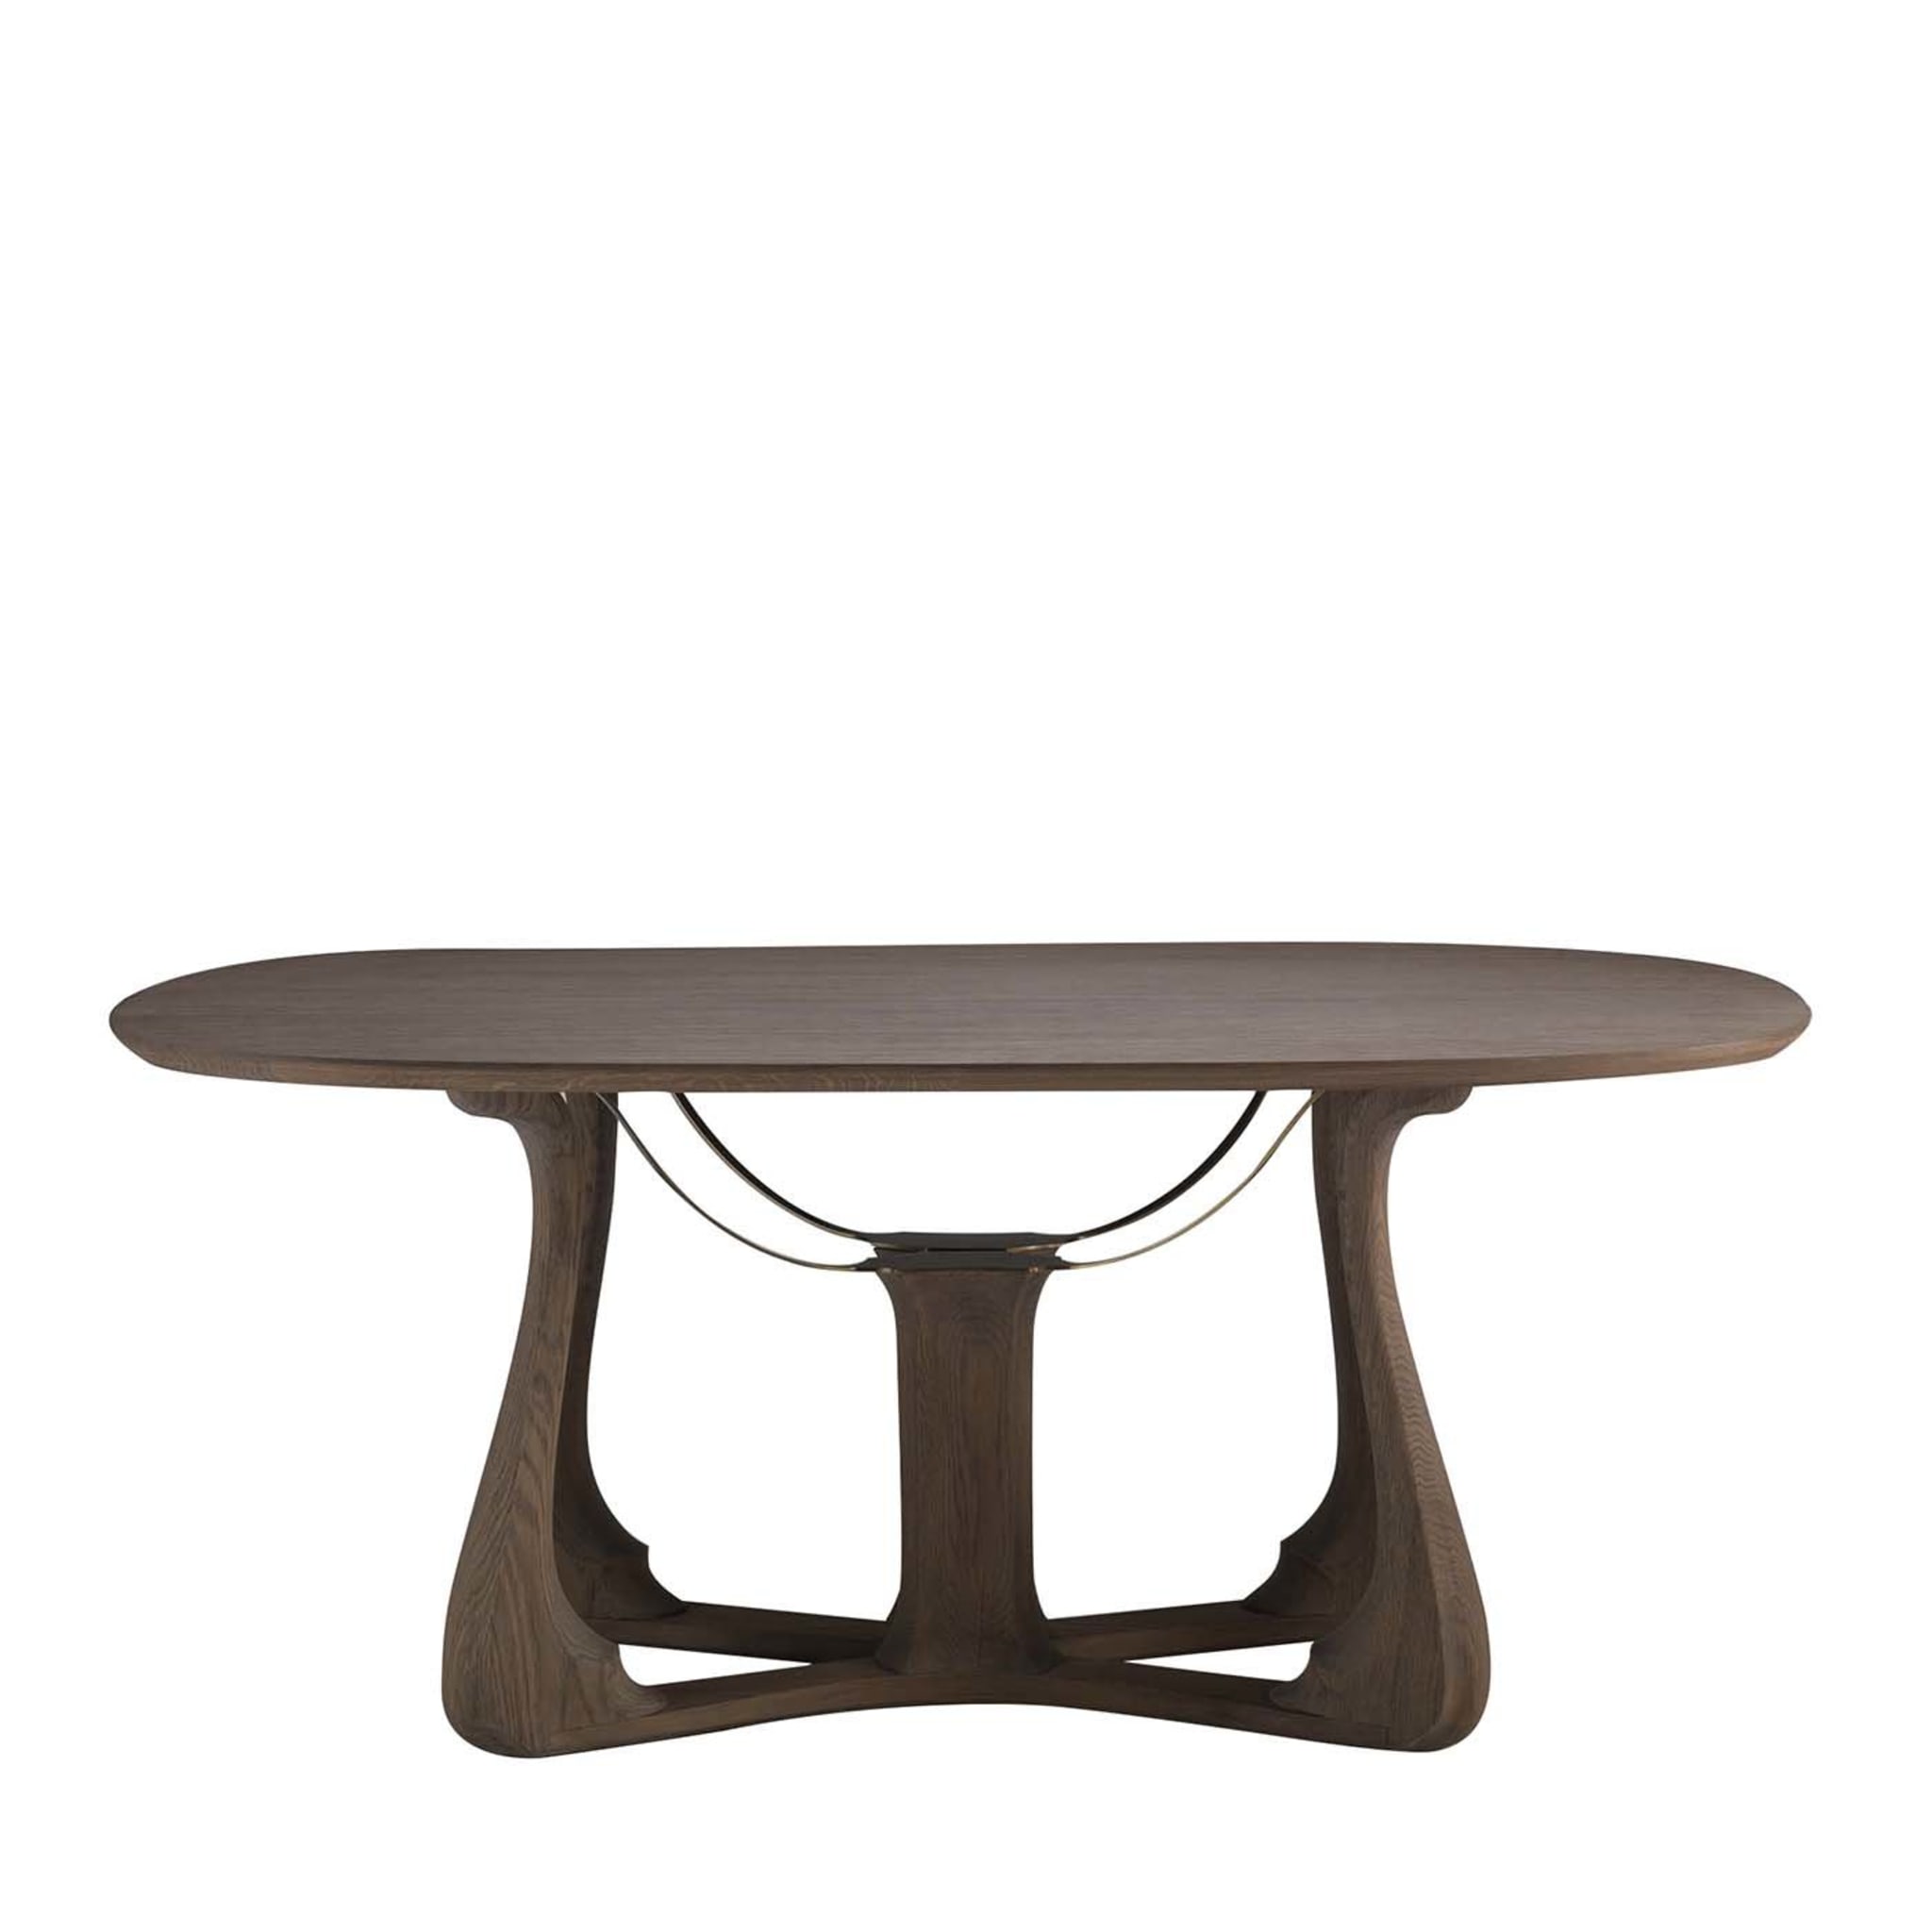 Arpa Dining Table by Giopato & Coombes - Main view